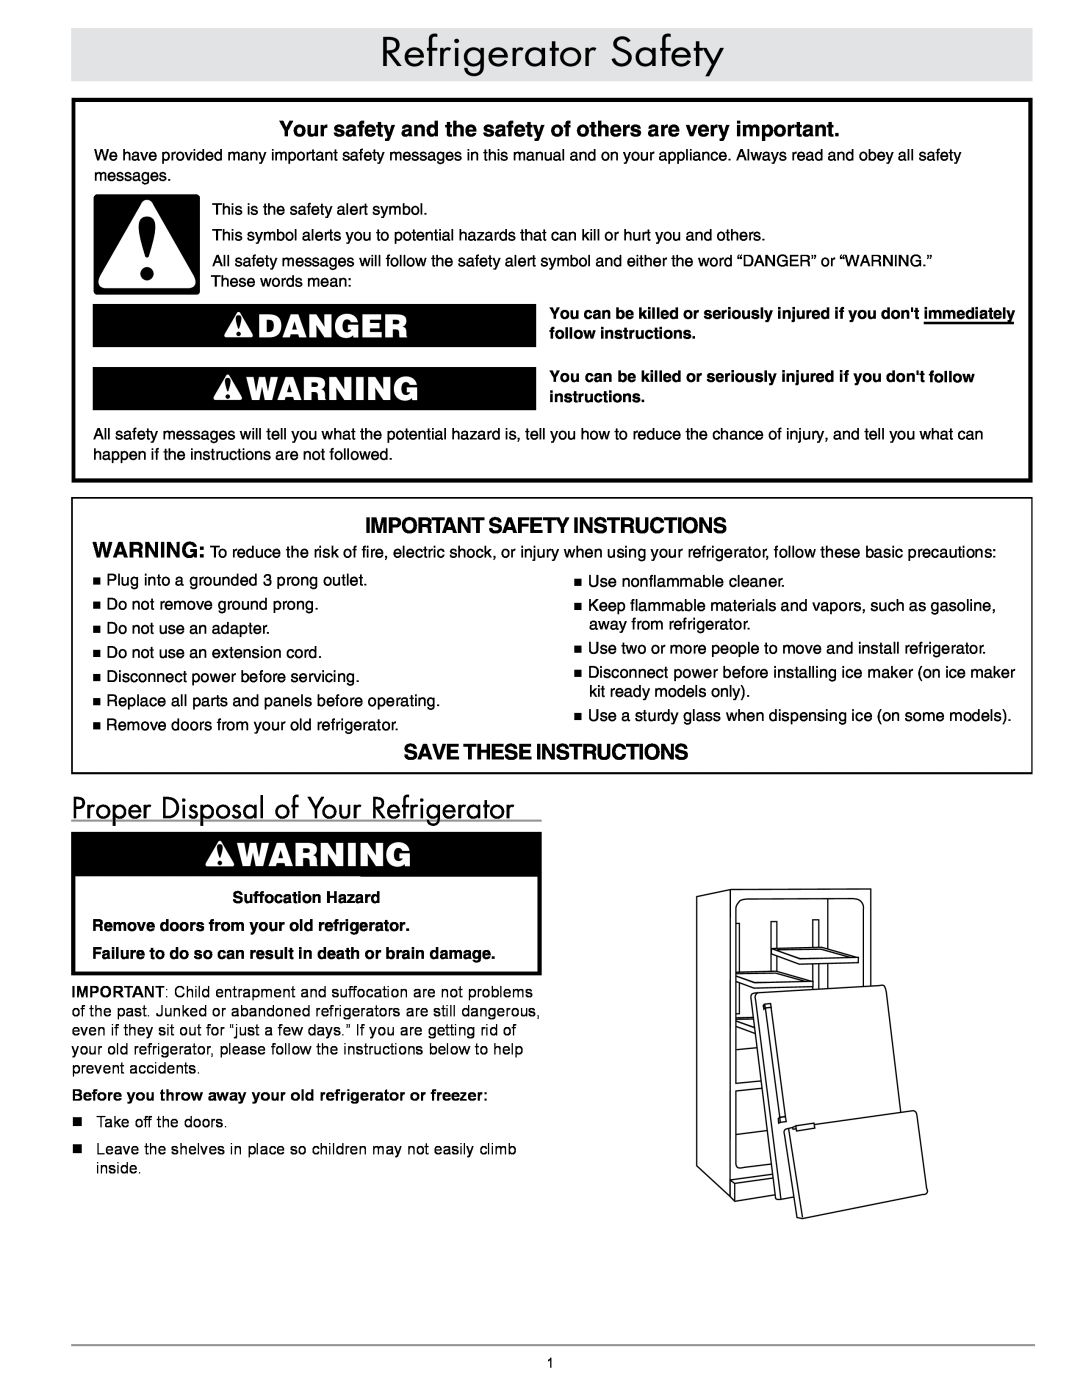 Dacor EF36IWF Refrigerator Safety, Proper Disposal of Your Refrigerator, Important Safety Instructions, Danger Warning 